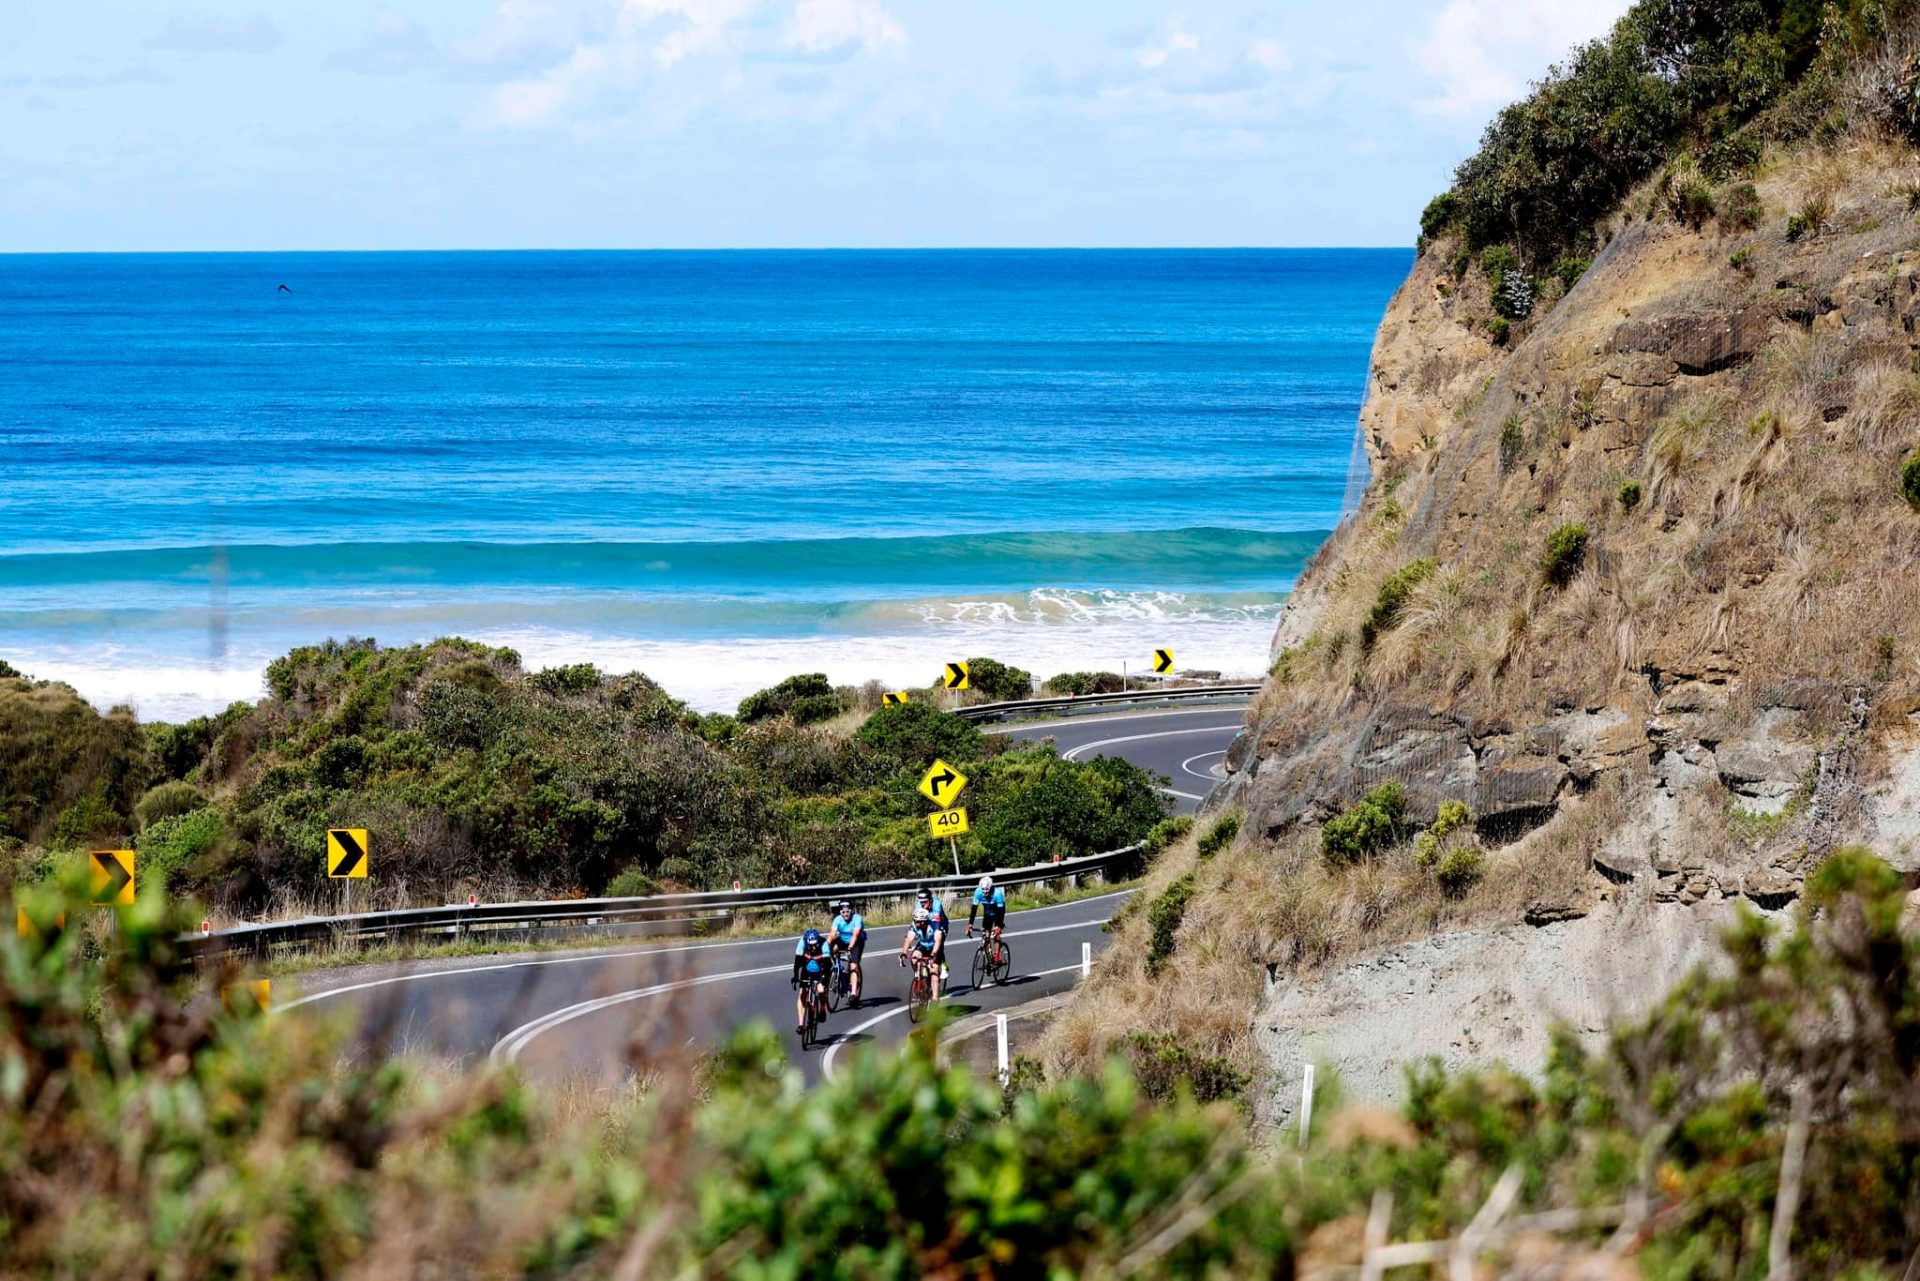 A small group of cyclist rides along the Great Ocean Road, a coastal route in Victoria, Australia. The road hugs the cliffs with the ocean in the background.